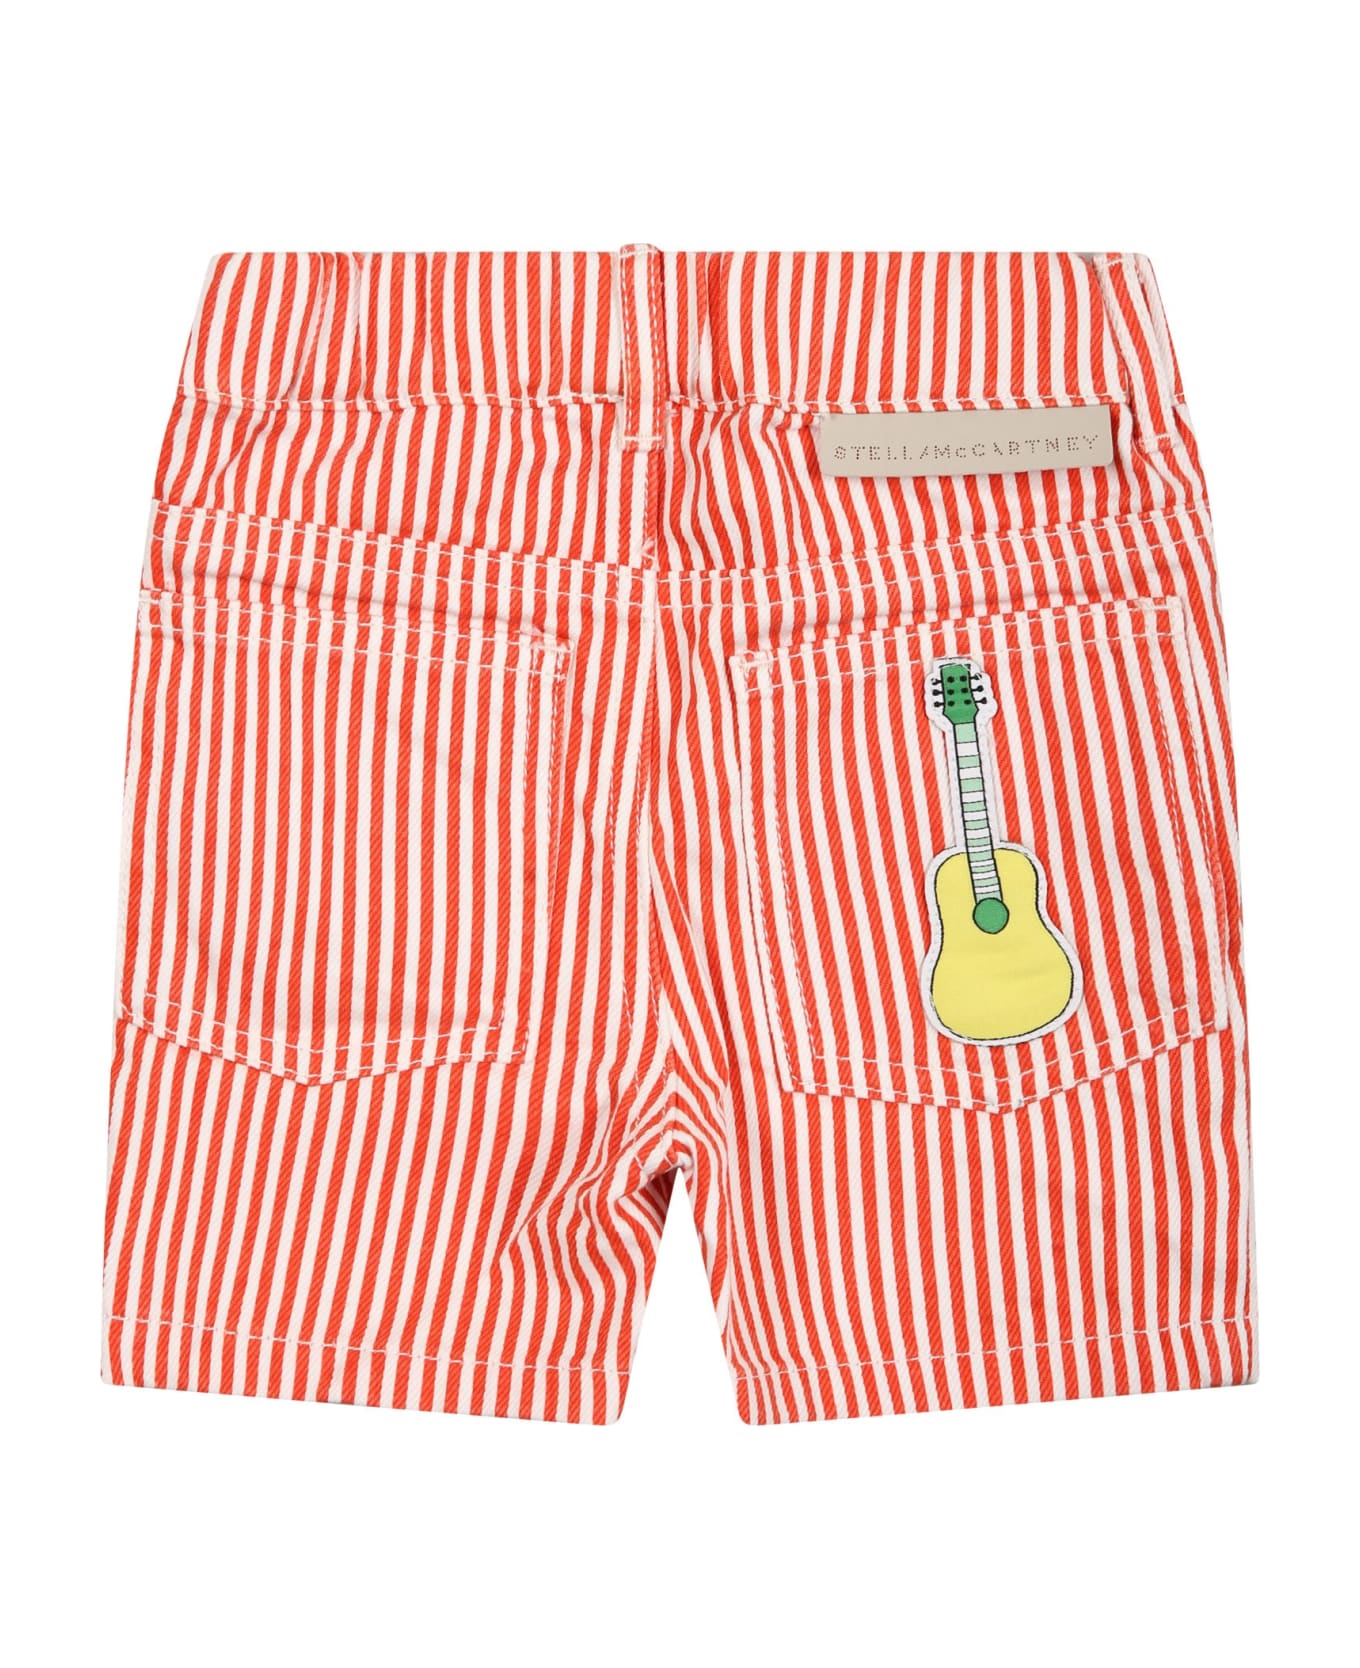 Stella McCartney Kids Multicolor Shorts For Baby Boy With Patch - Multicolor